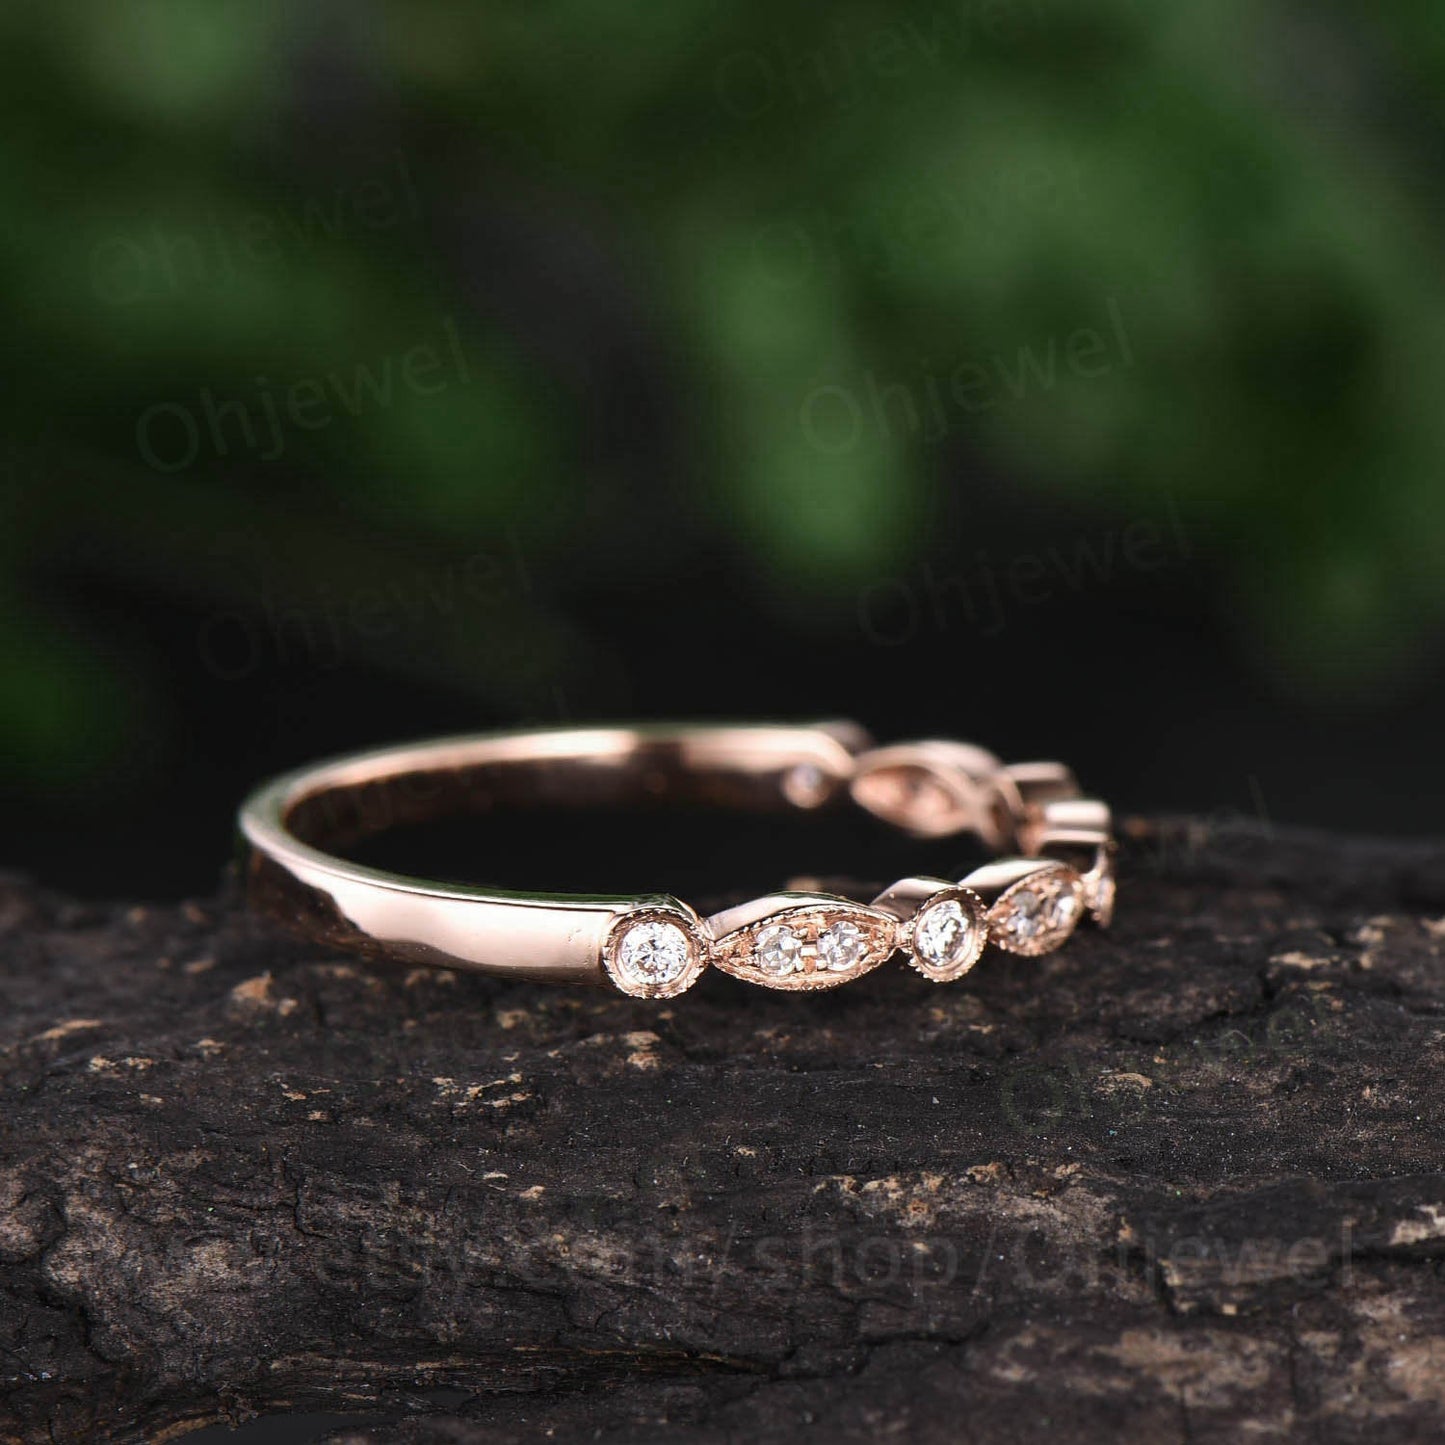 Rose gold ring real diamond ring vintage diamond wedding band art deco ring half eternity ring anniversary ring graduation gift for her